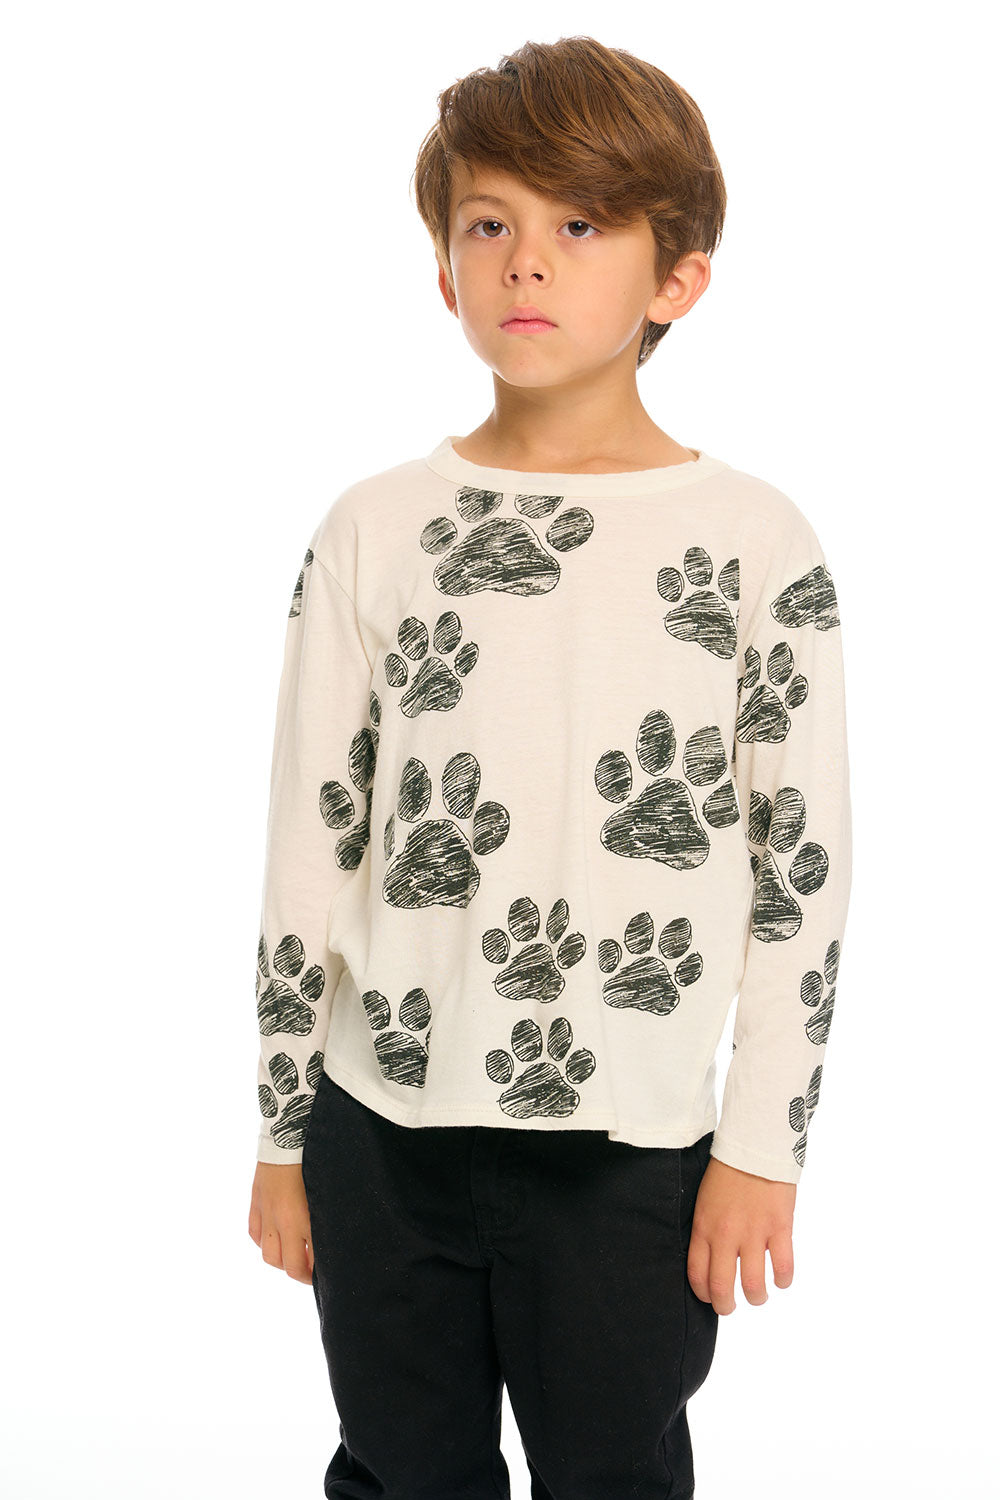 All Over Dog Paw Charity Shirt BOYS chaserbrand